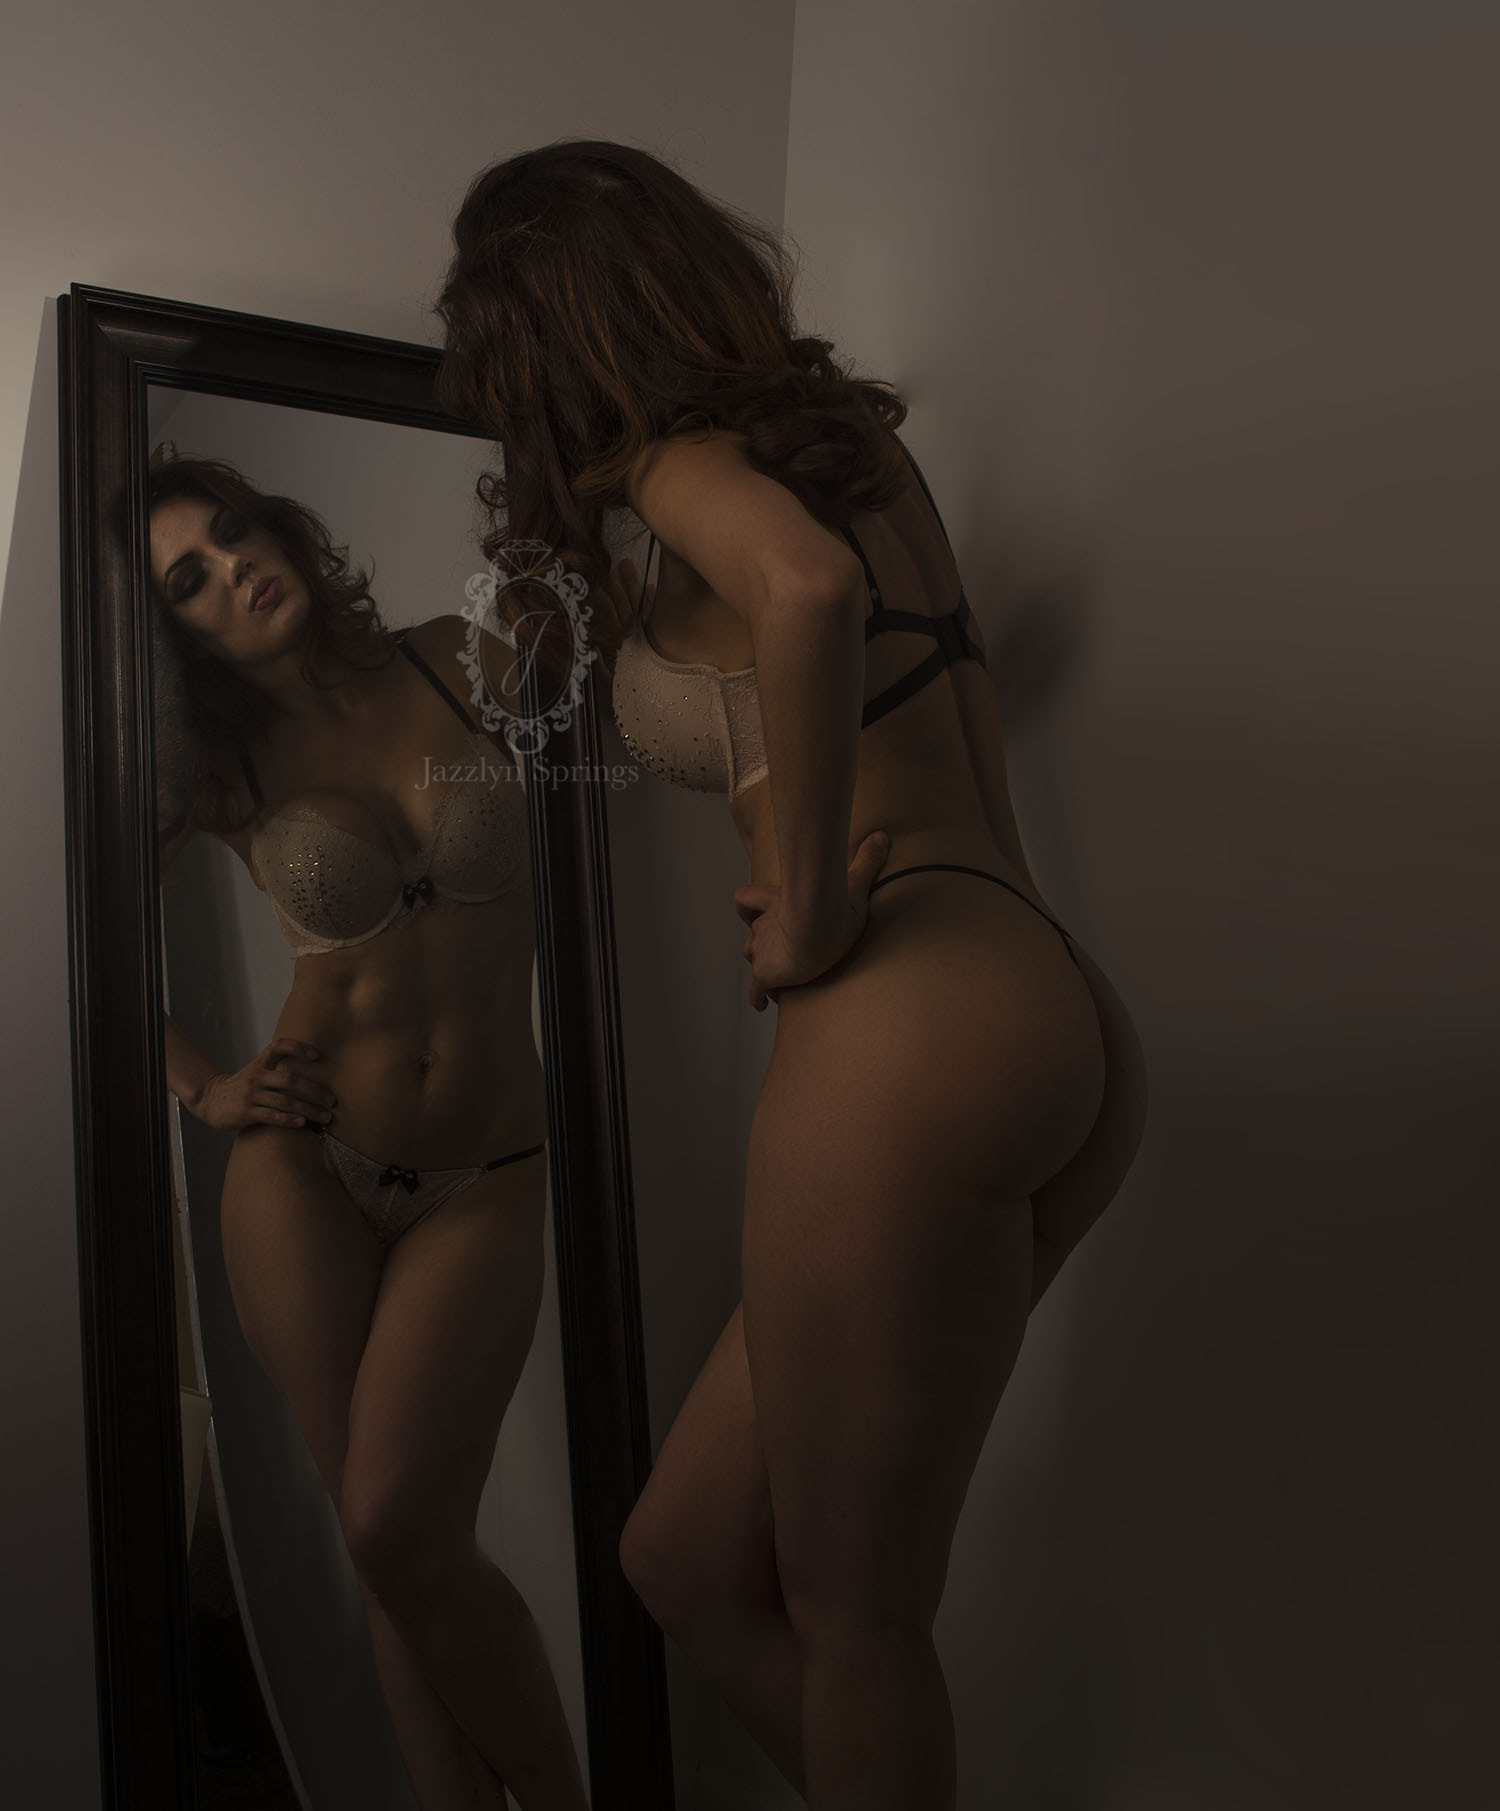 Nikon D7000 sample photo. Mirror mirror on the wall - vanity by jazzlyn springs photography